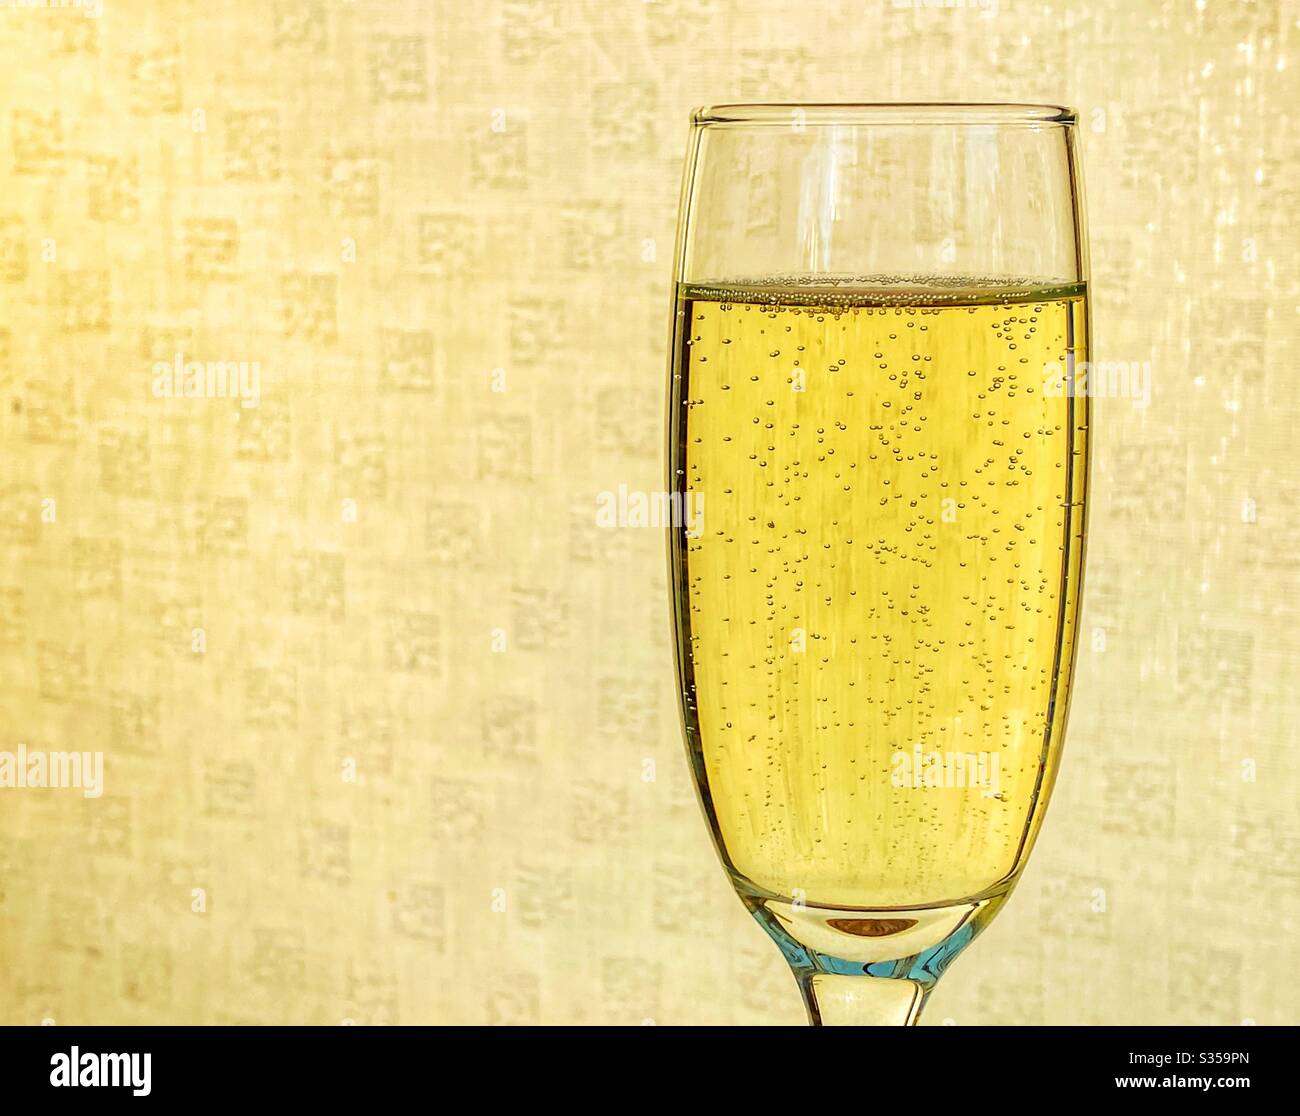 Flute glass of French champagne against a plain background backlit by sunlight Stock Photo